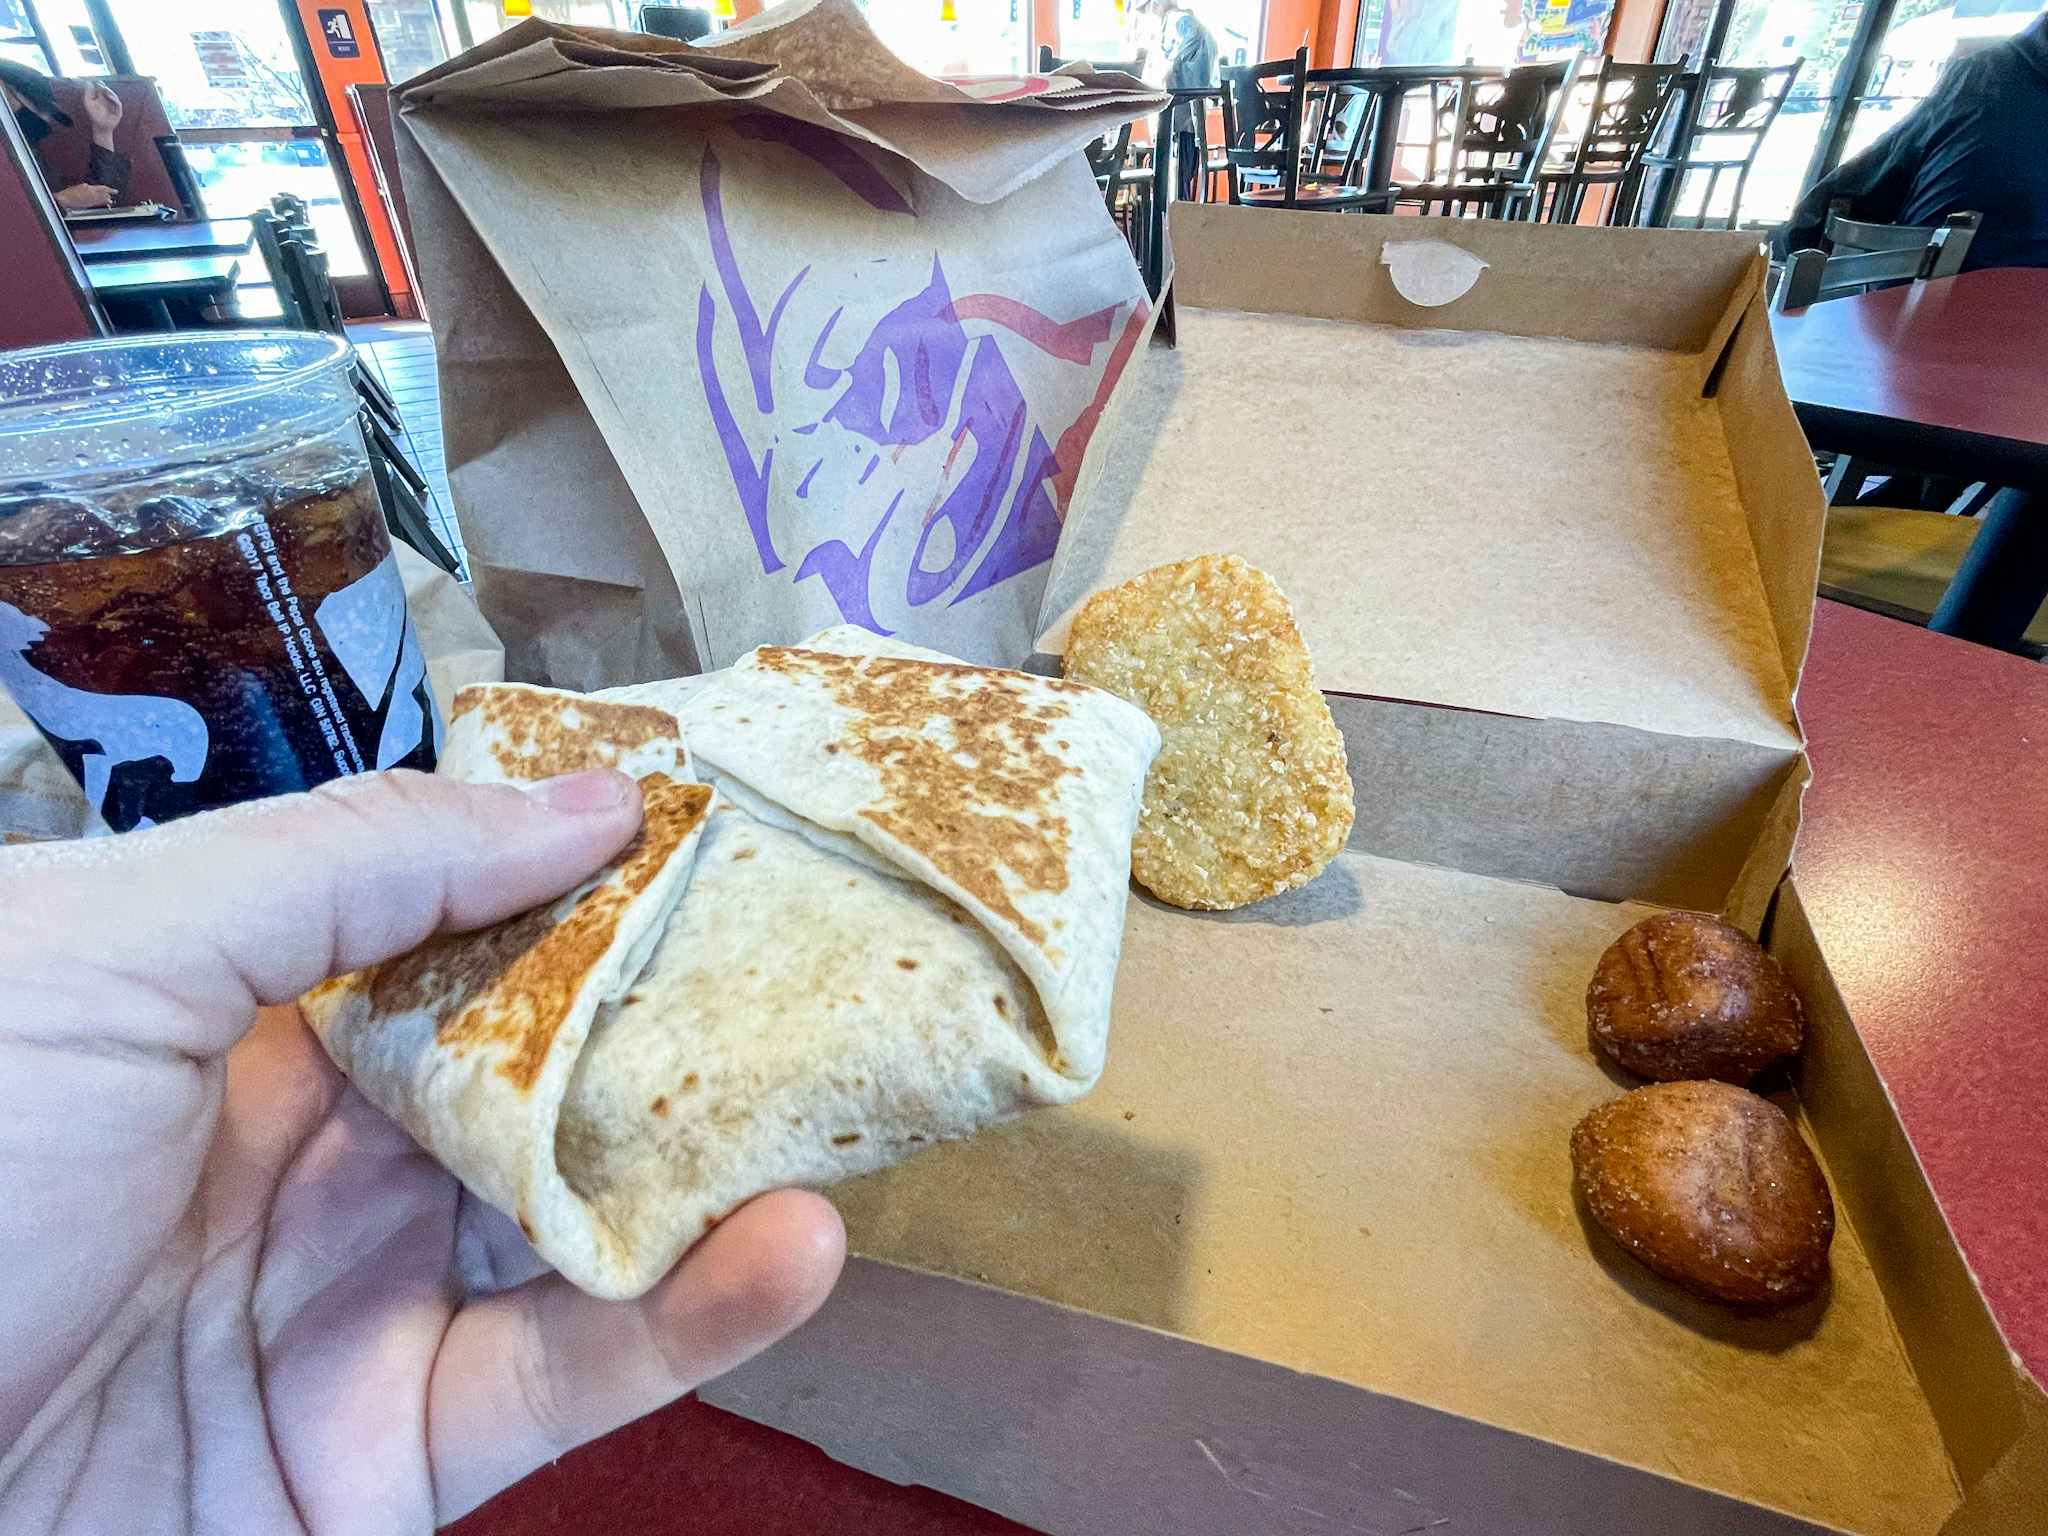 Taco Bell Just Launched A Breakfast Deal That Checks All The Boxes